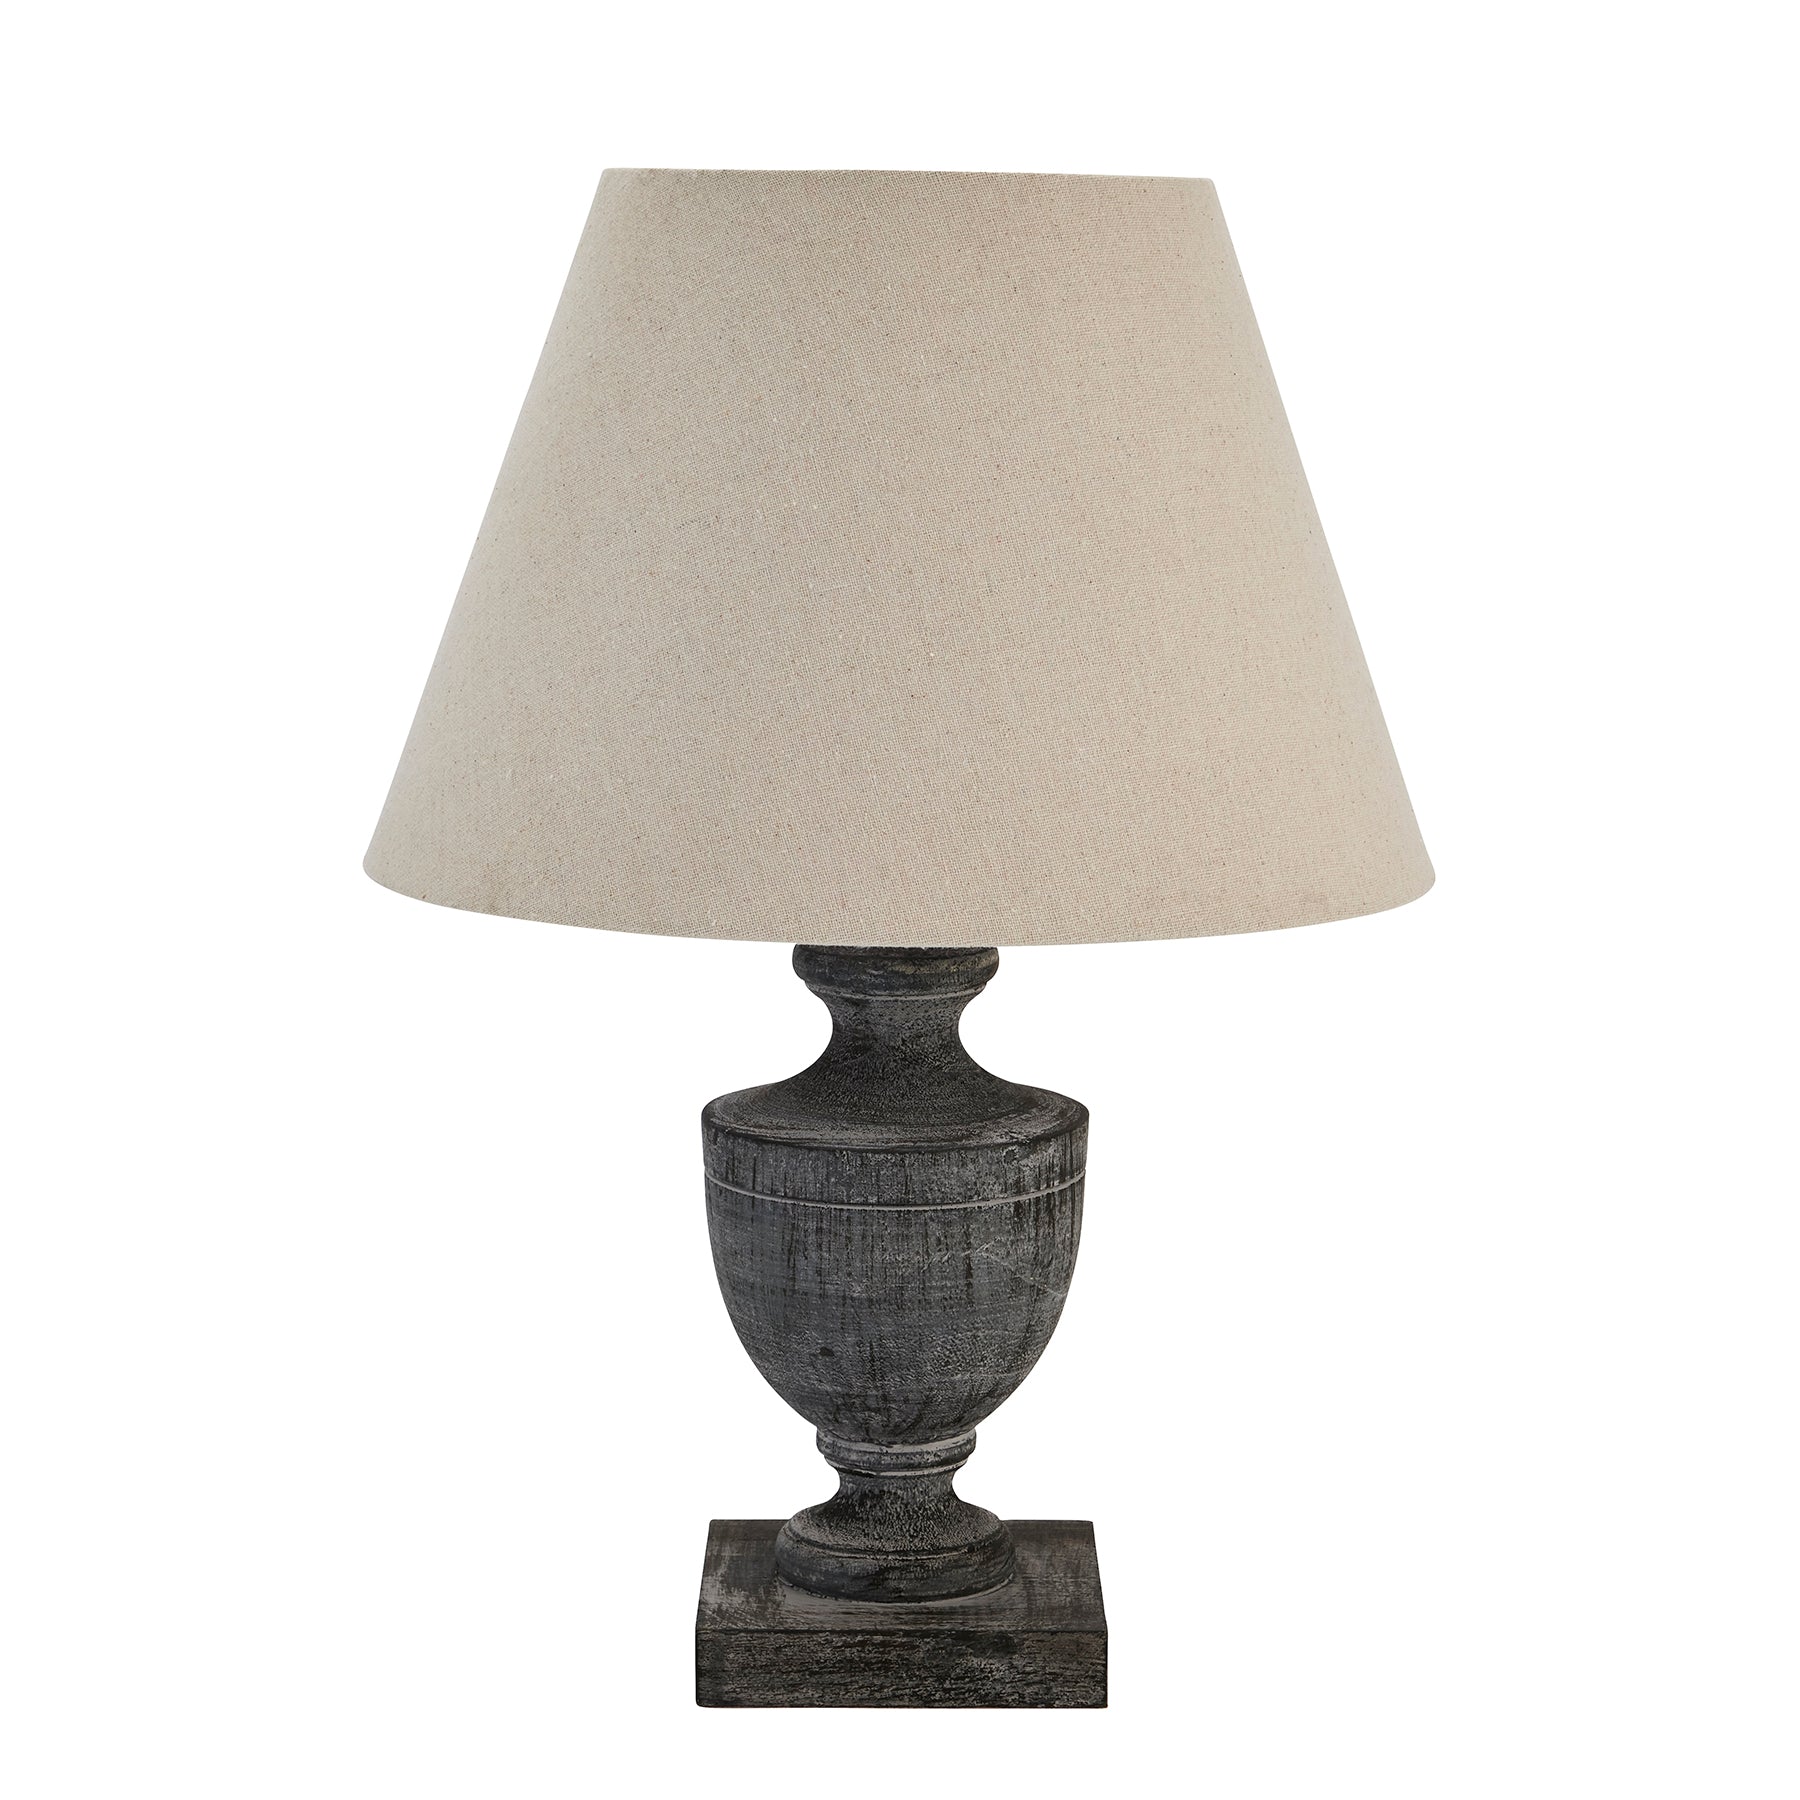 View Incia Urn Wooden Table Lamp information